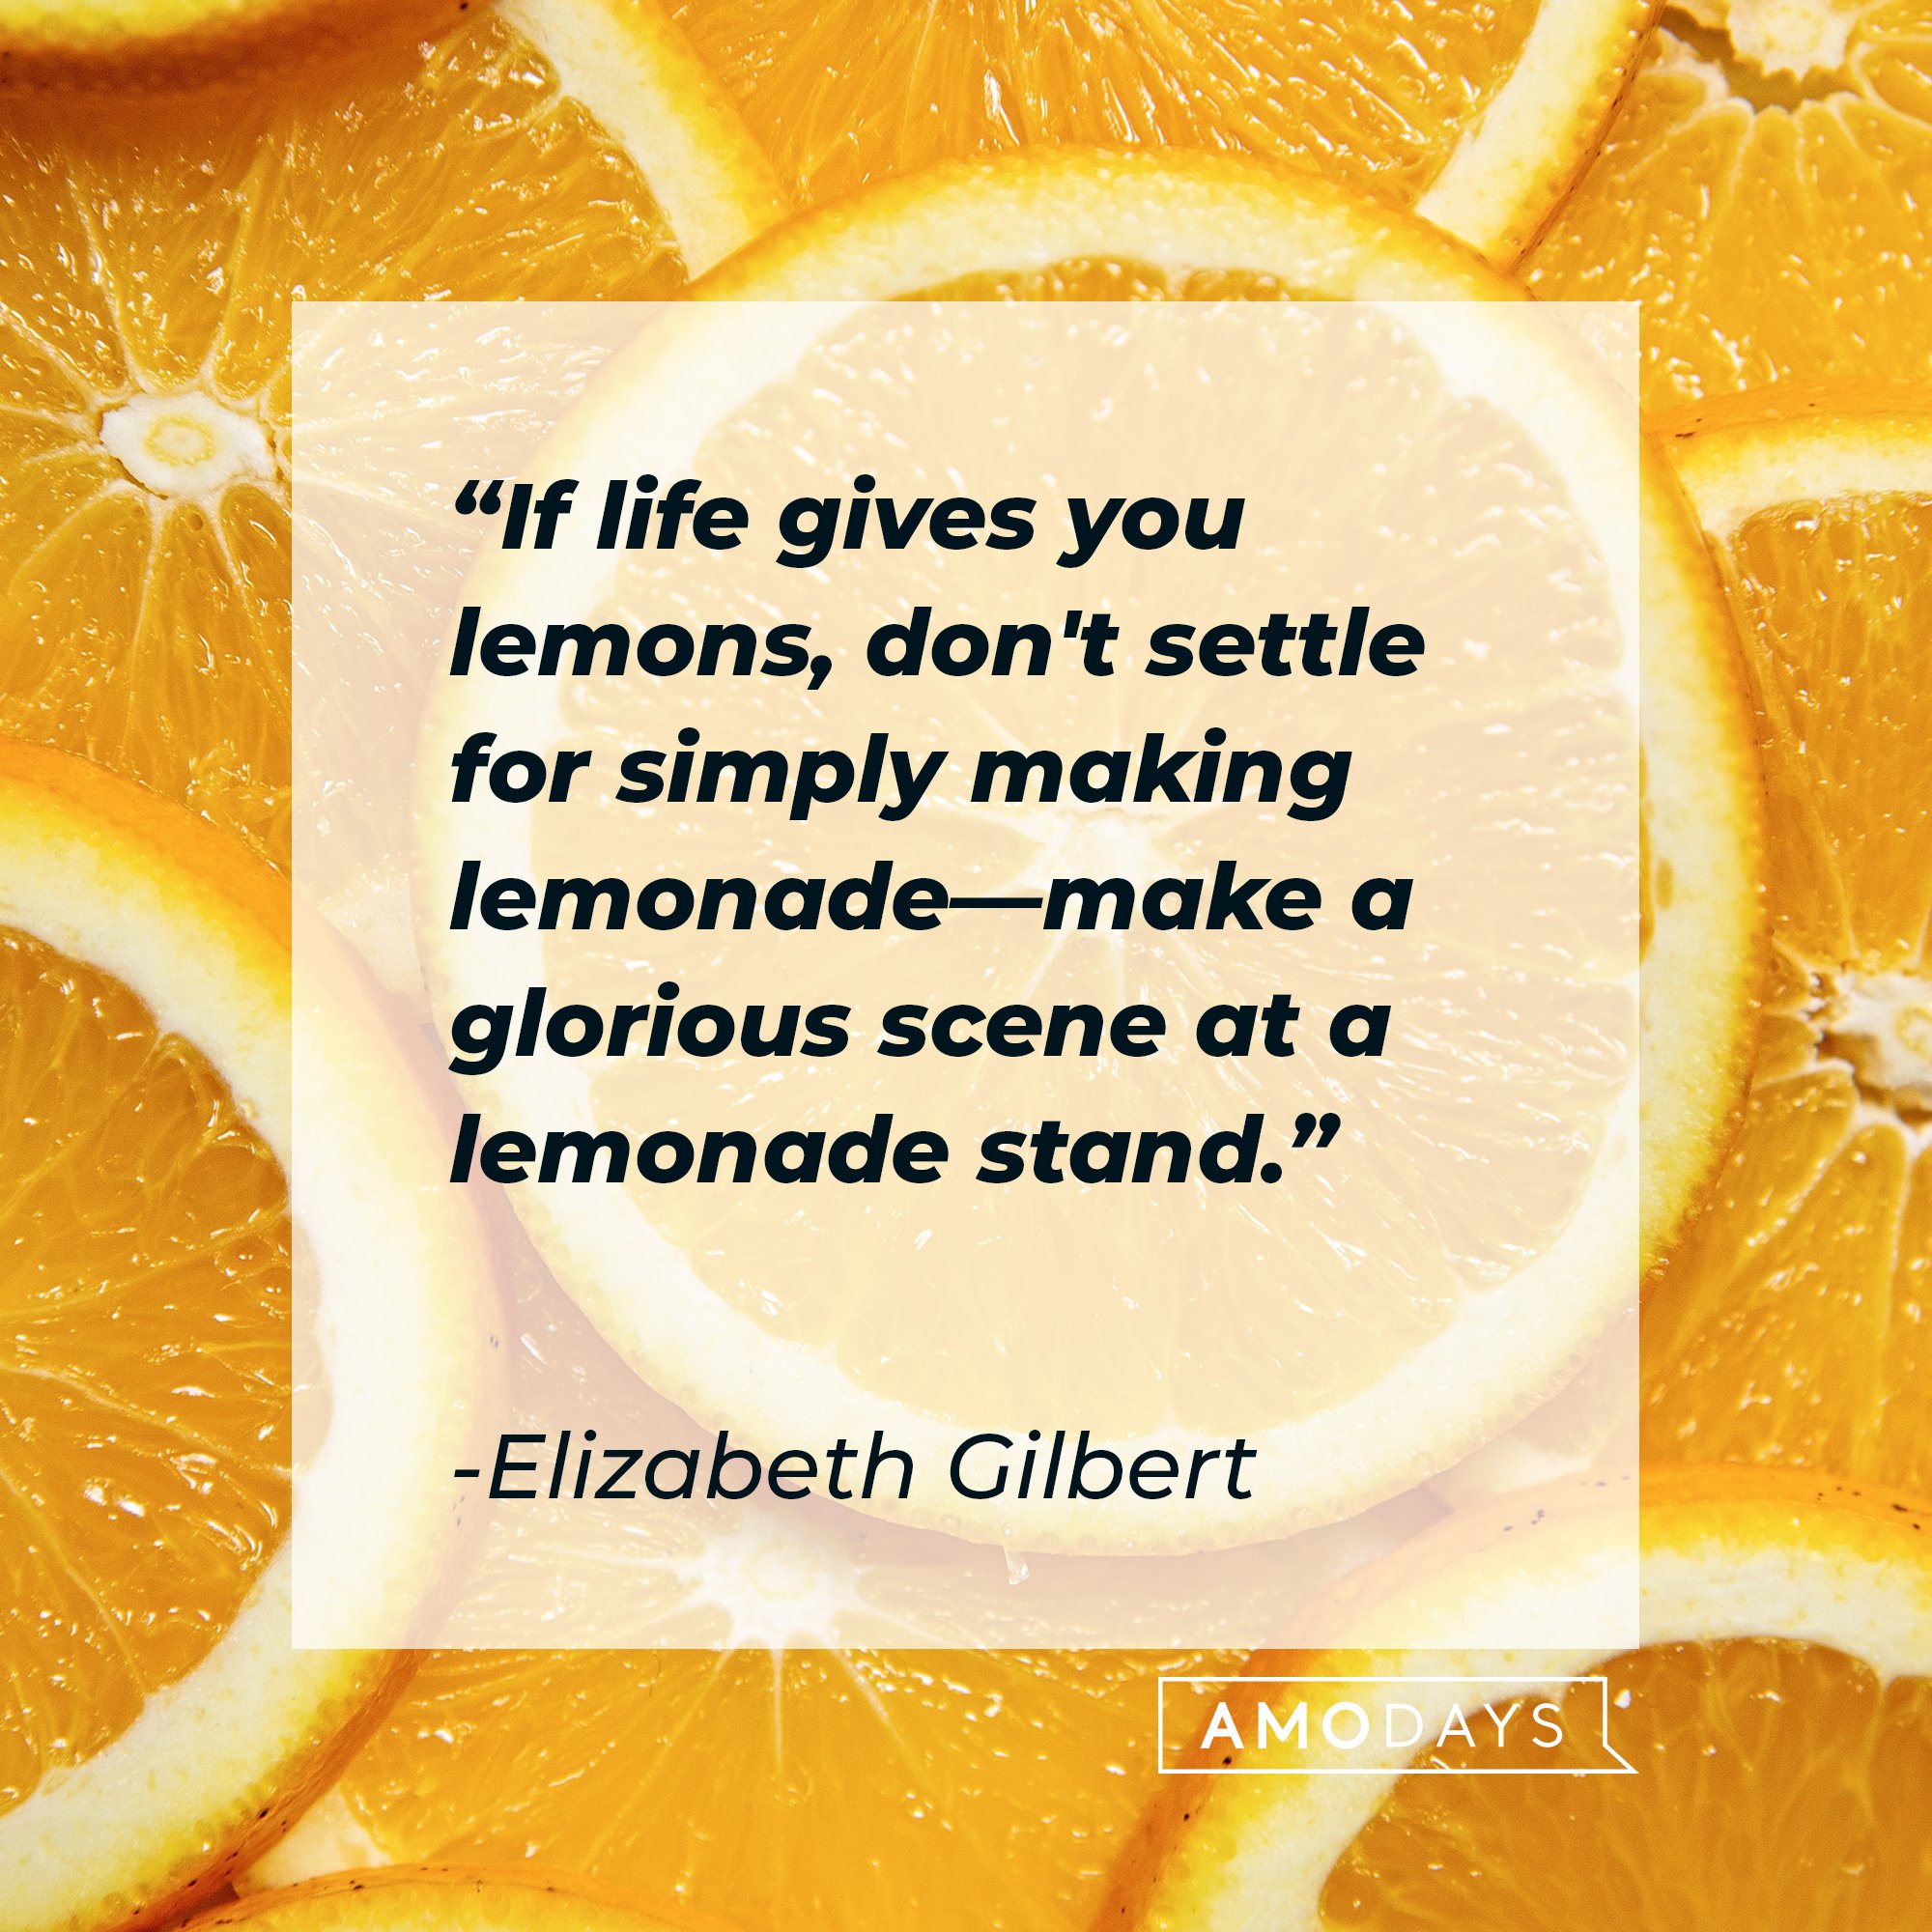 Elizabeth Gilbert’s quote: "If life gives you lemons, don't settle for simply making lemonade—make a glorious scene at a lemonade stand." | Image: AmoDays 